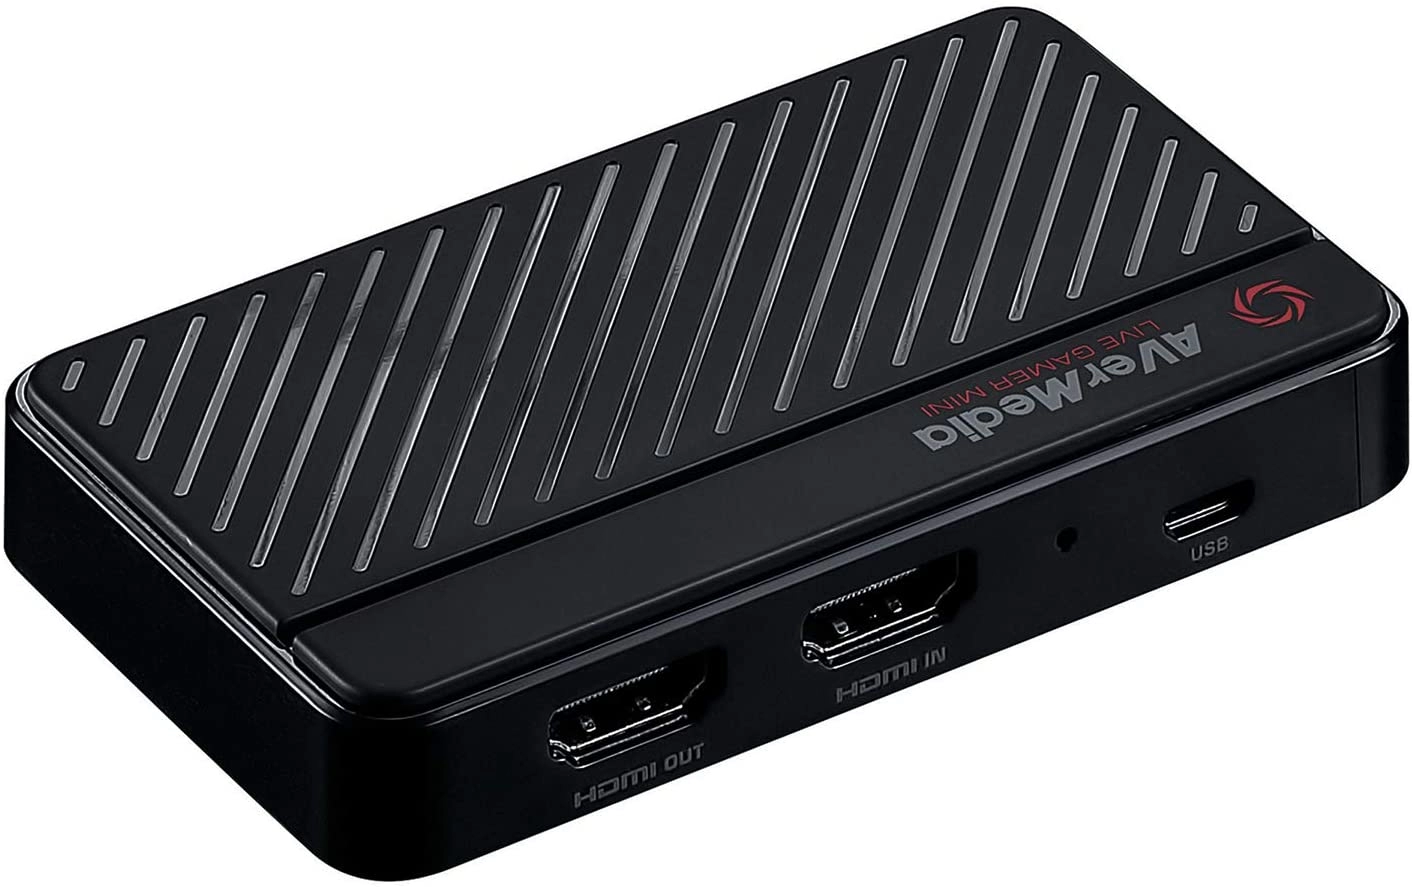 AverMedia Live Gamer MINI - GC311: Video/Audio Ouput: HDMI 2.0/ Input: HDMI 2.0, Max Pass-Through Res: 1080p60, Max Record Res:1080p60, Record Format: MPEG 4 (H.264+AAC) Supports hardware encoding, Interface: microUSB 2.0